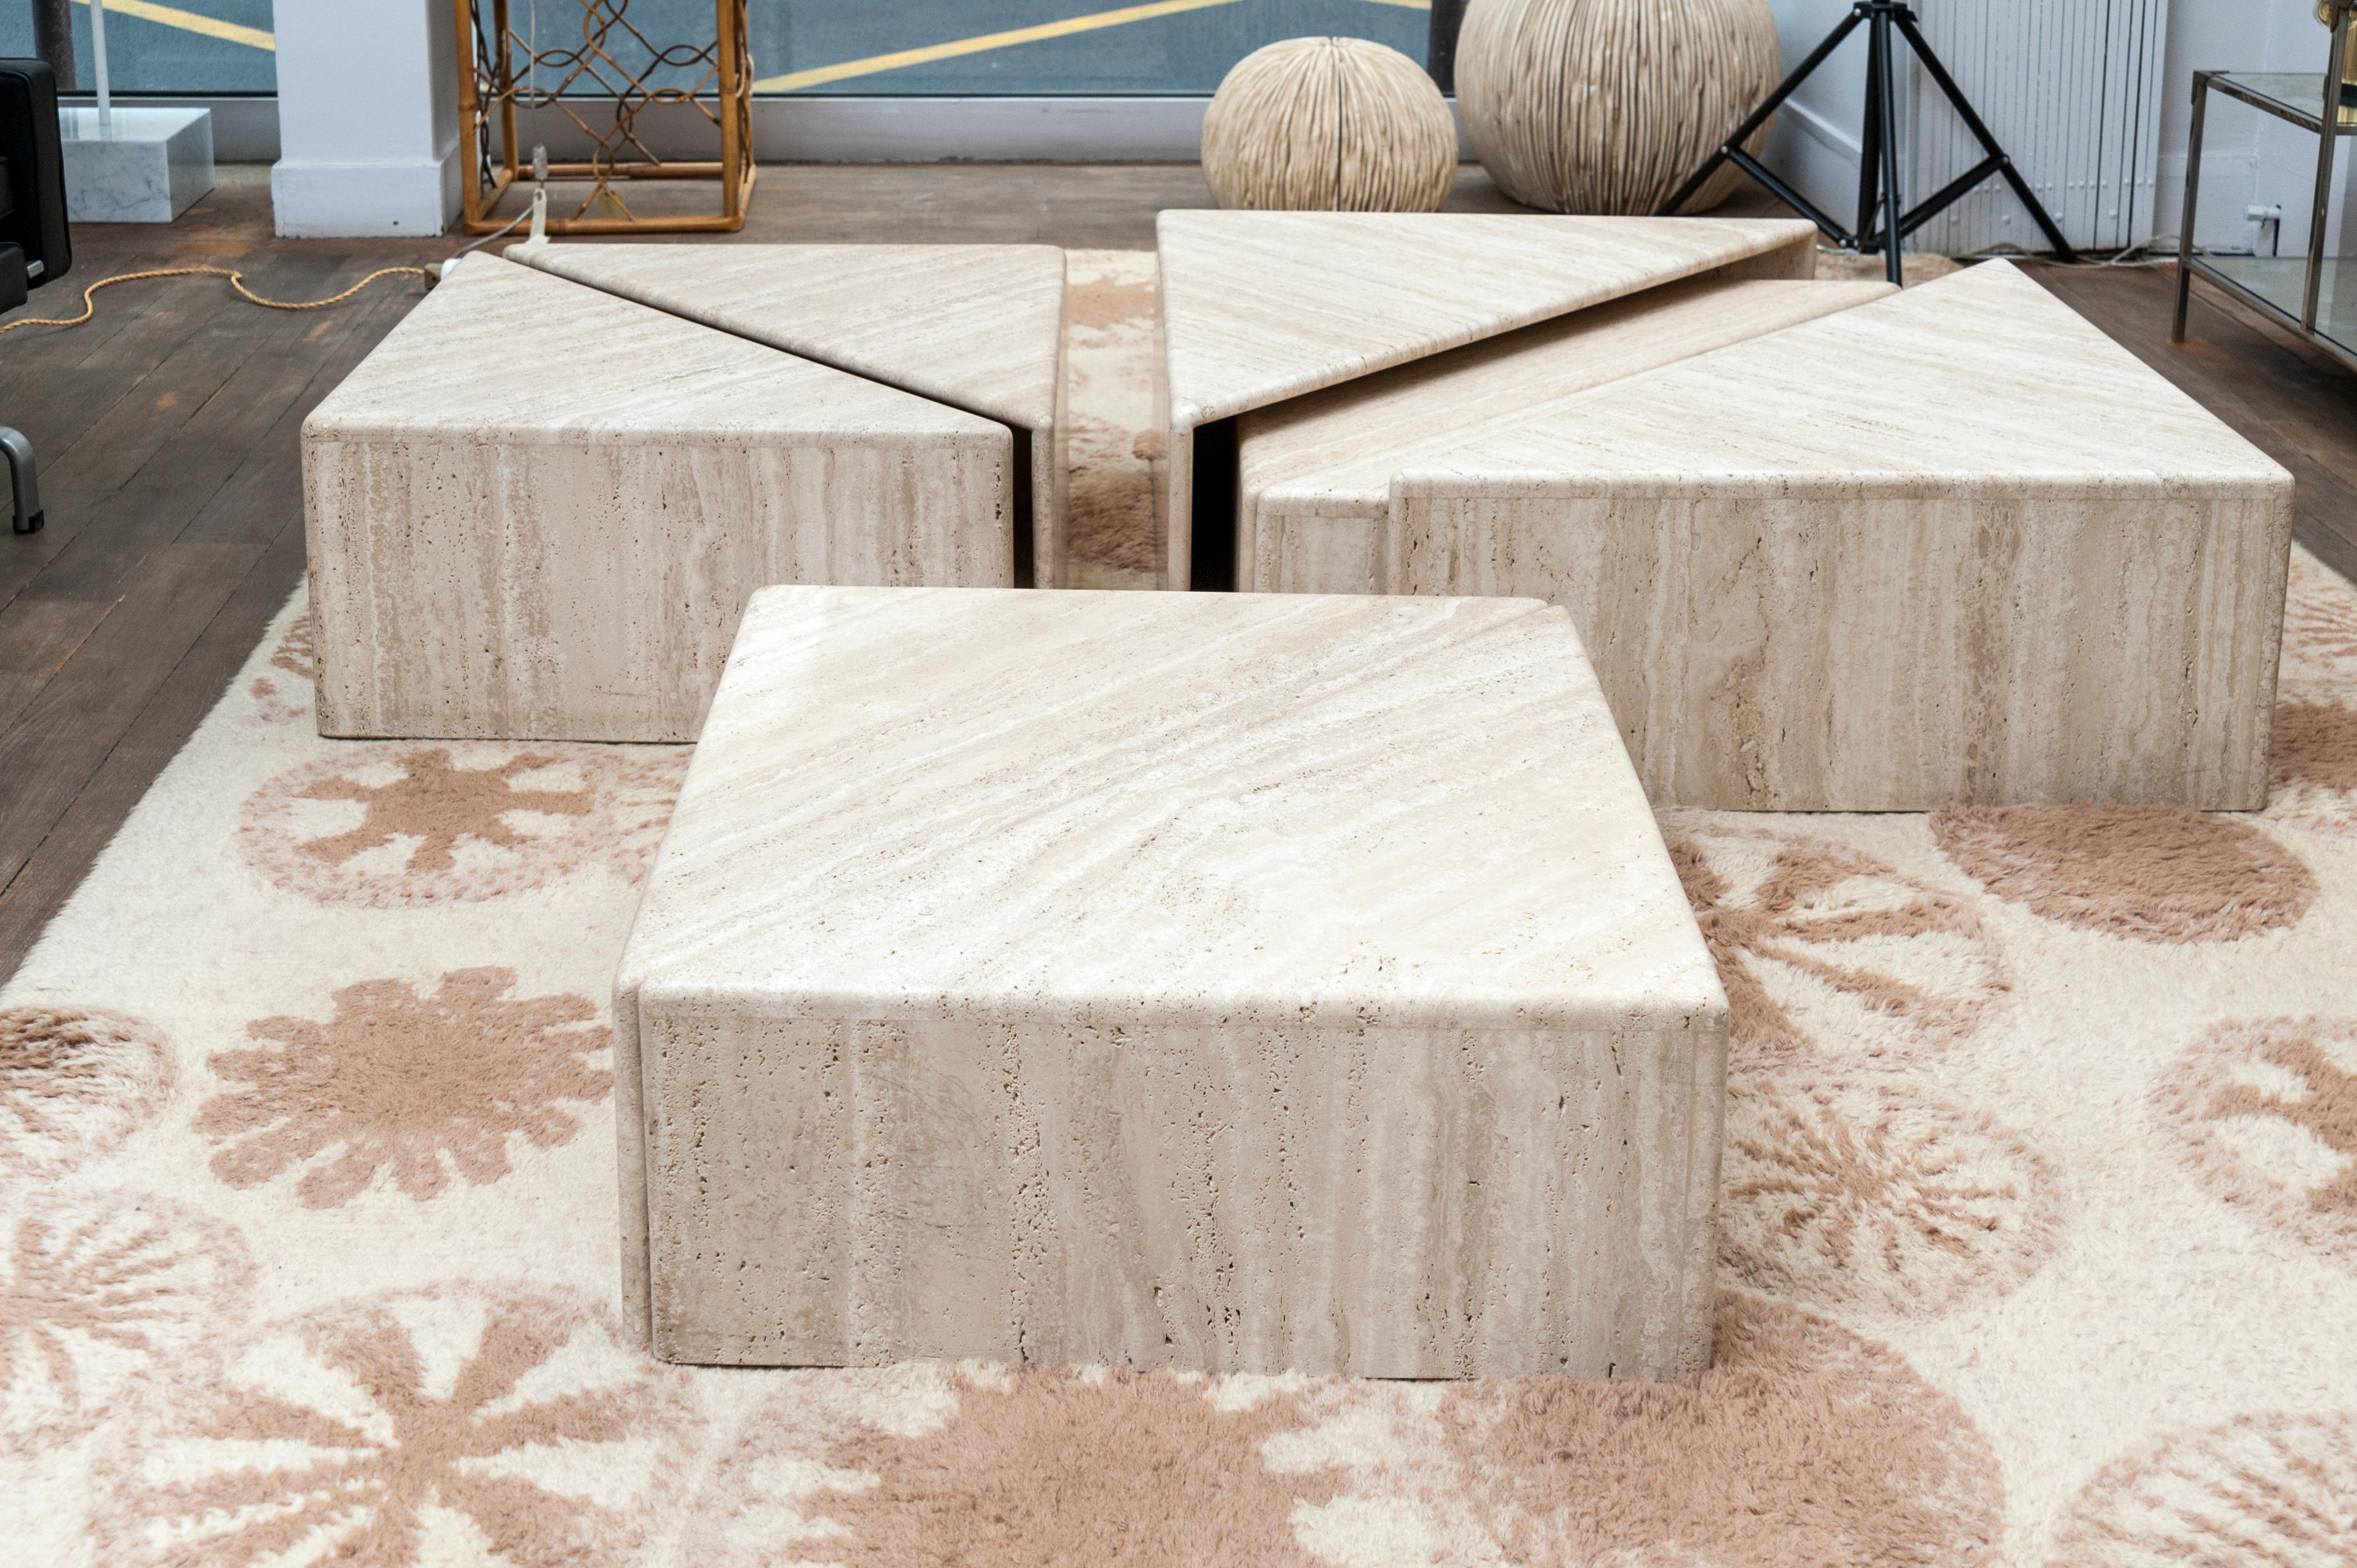 A set of 8 triangular elements forming four squares.
Travertine
It's possible to combine these elements in many ways to form one or more coffee tables.
Italy, 1970s.

Measures: Square 1 : 28 x 70 x 70 cm // 11 x 27.5 x 27.5 in.
Square 2 : 23 x